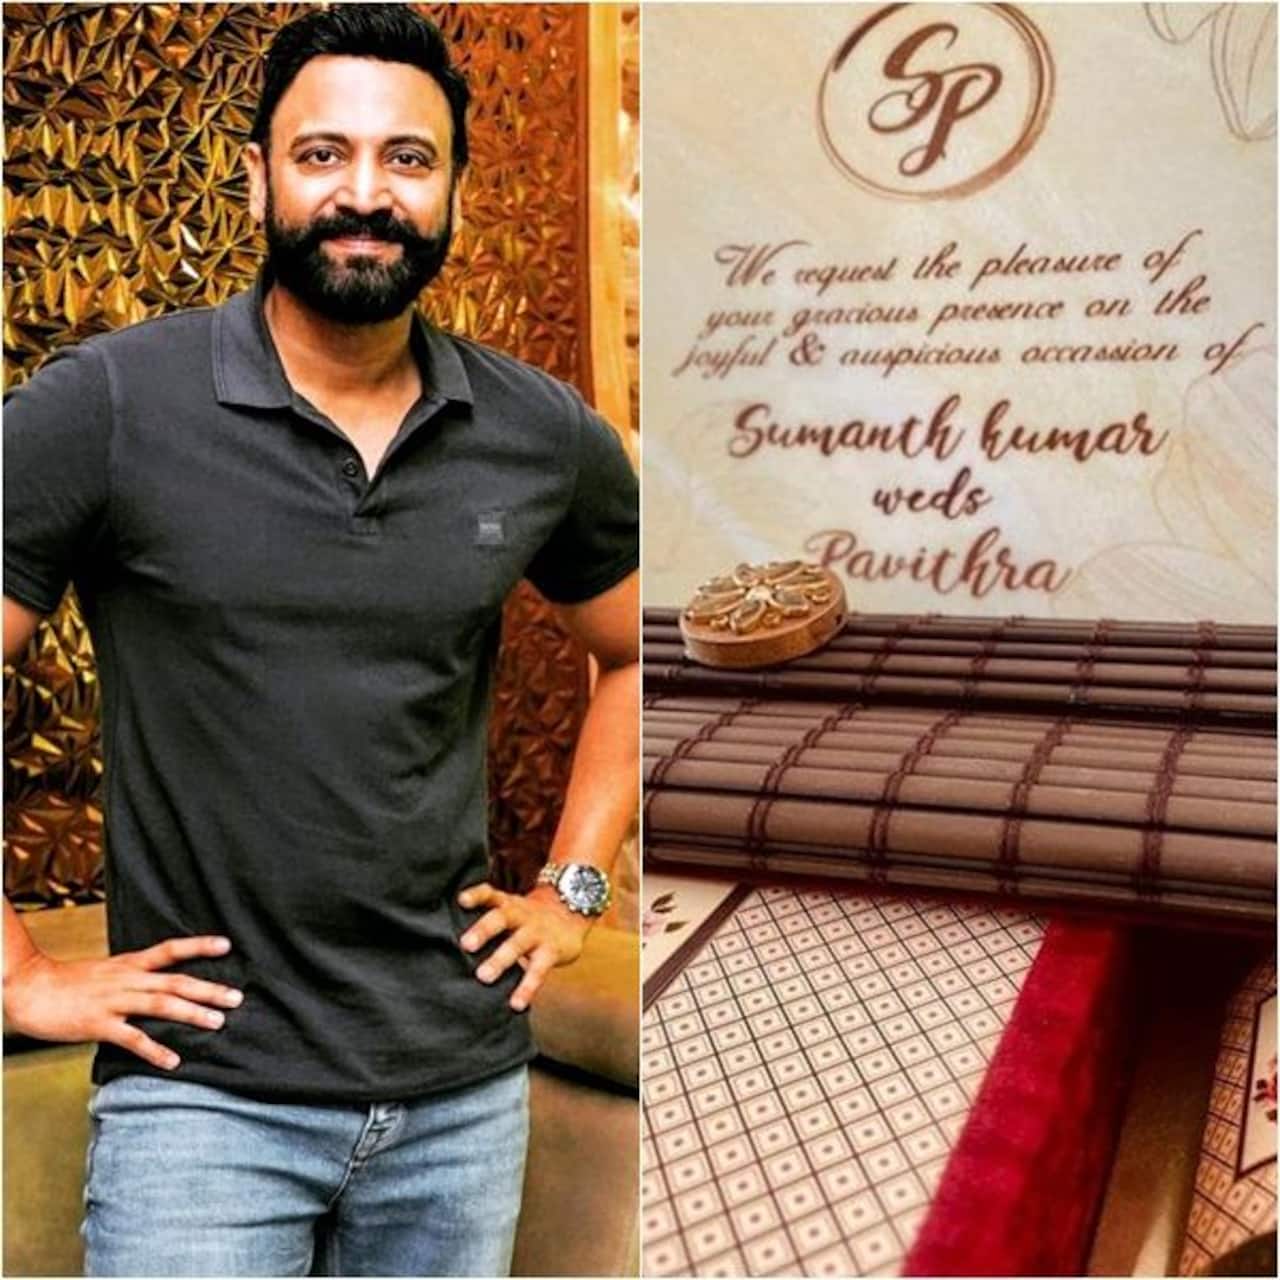 After his divorce with Keerthi Reddy, Sumanth Akkineni to get married for the second time with a girl named Pavithra – Wedding card goes viral